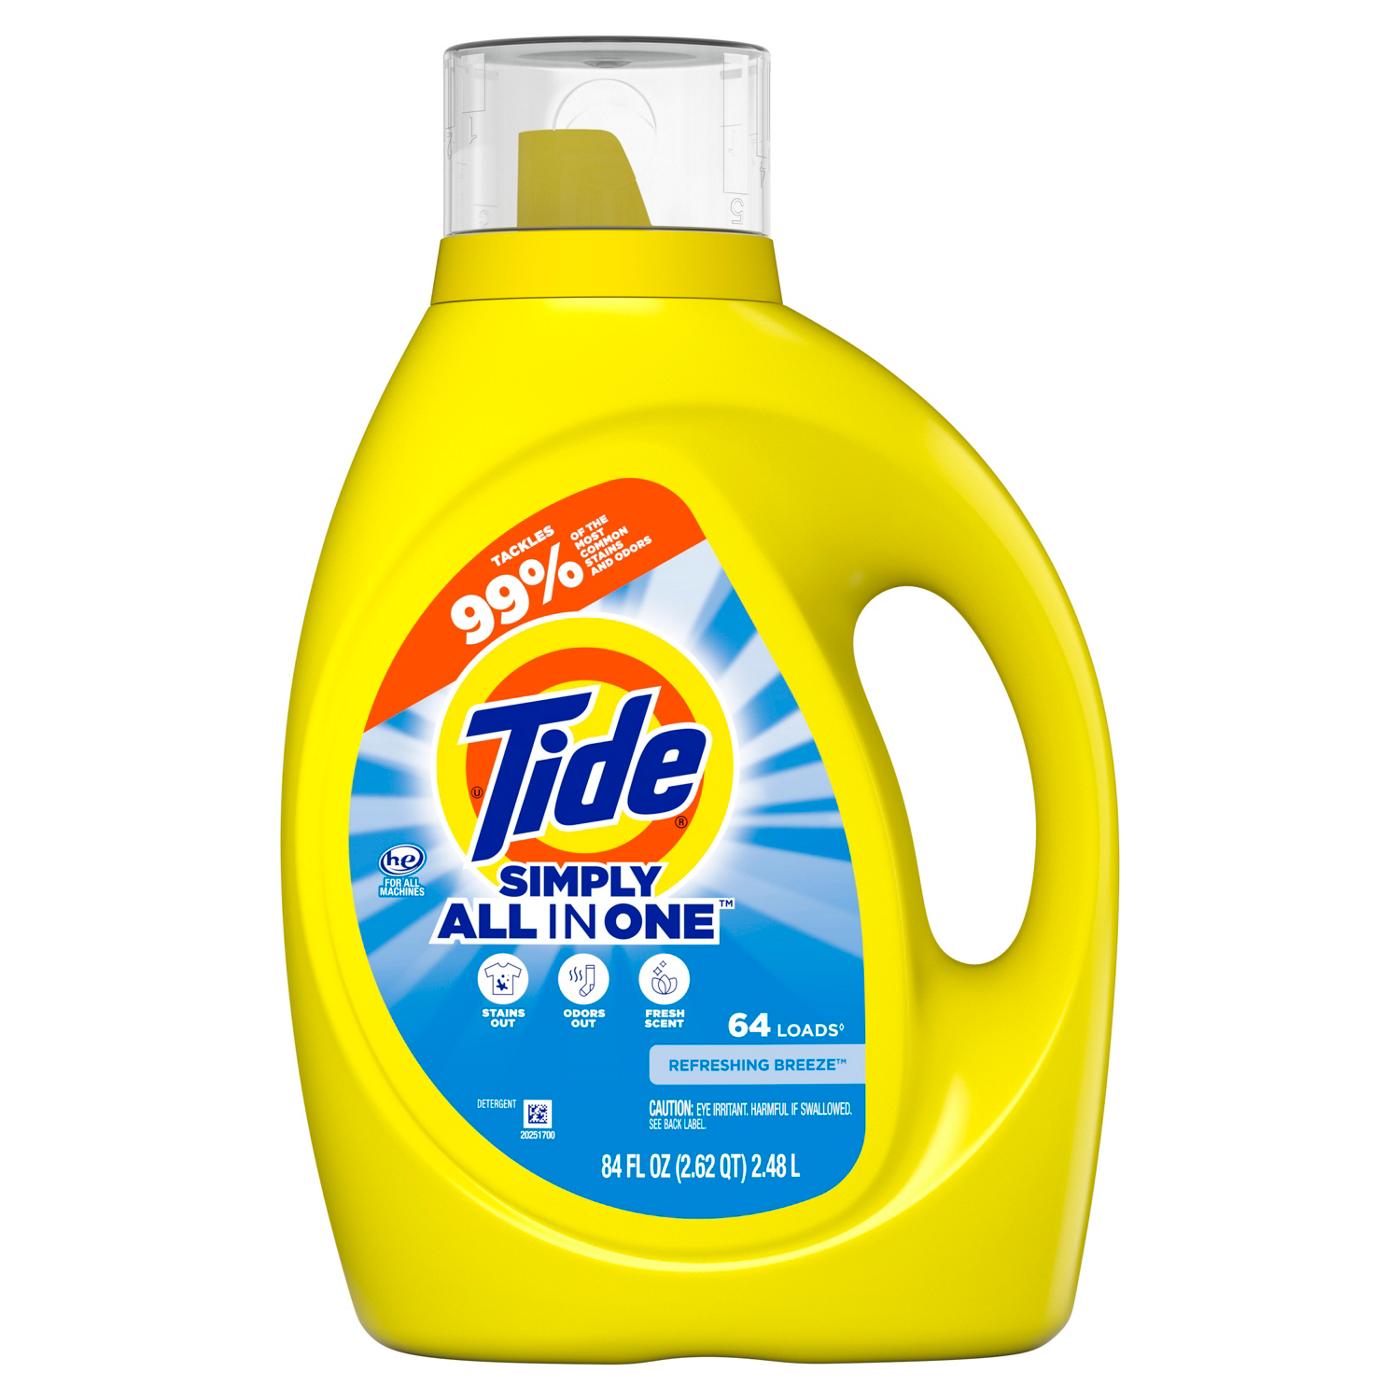 Tide Simply Clean & Fresh HE Liquid Laundry Detergent, 64 Loads - Refreshing Breeze; image 1 of 15